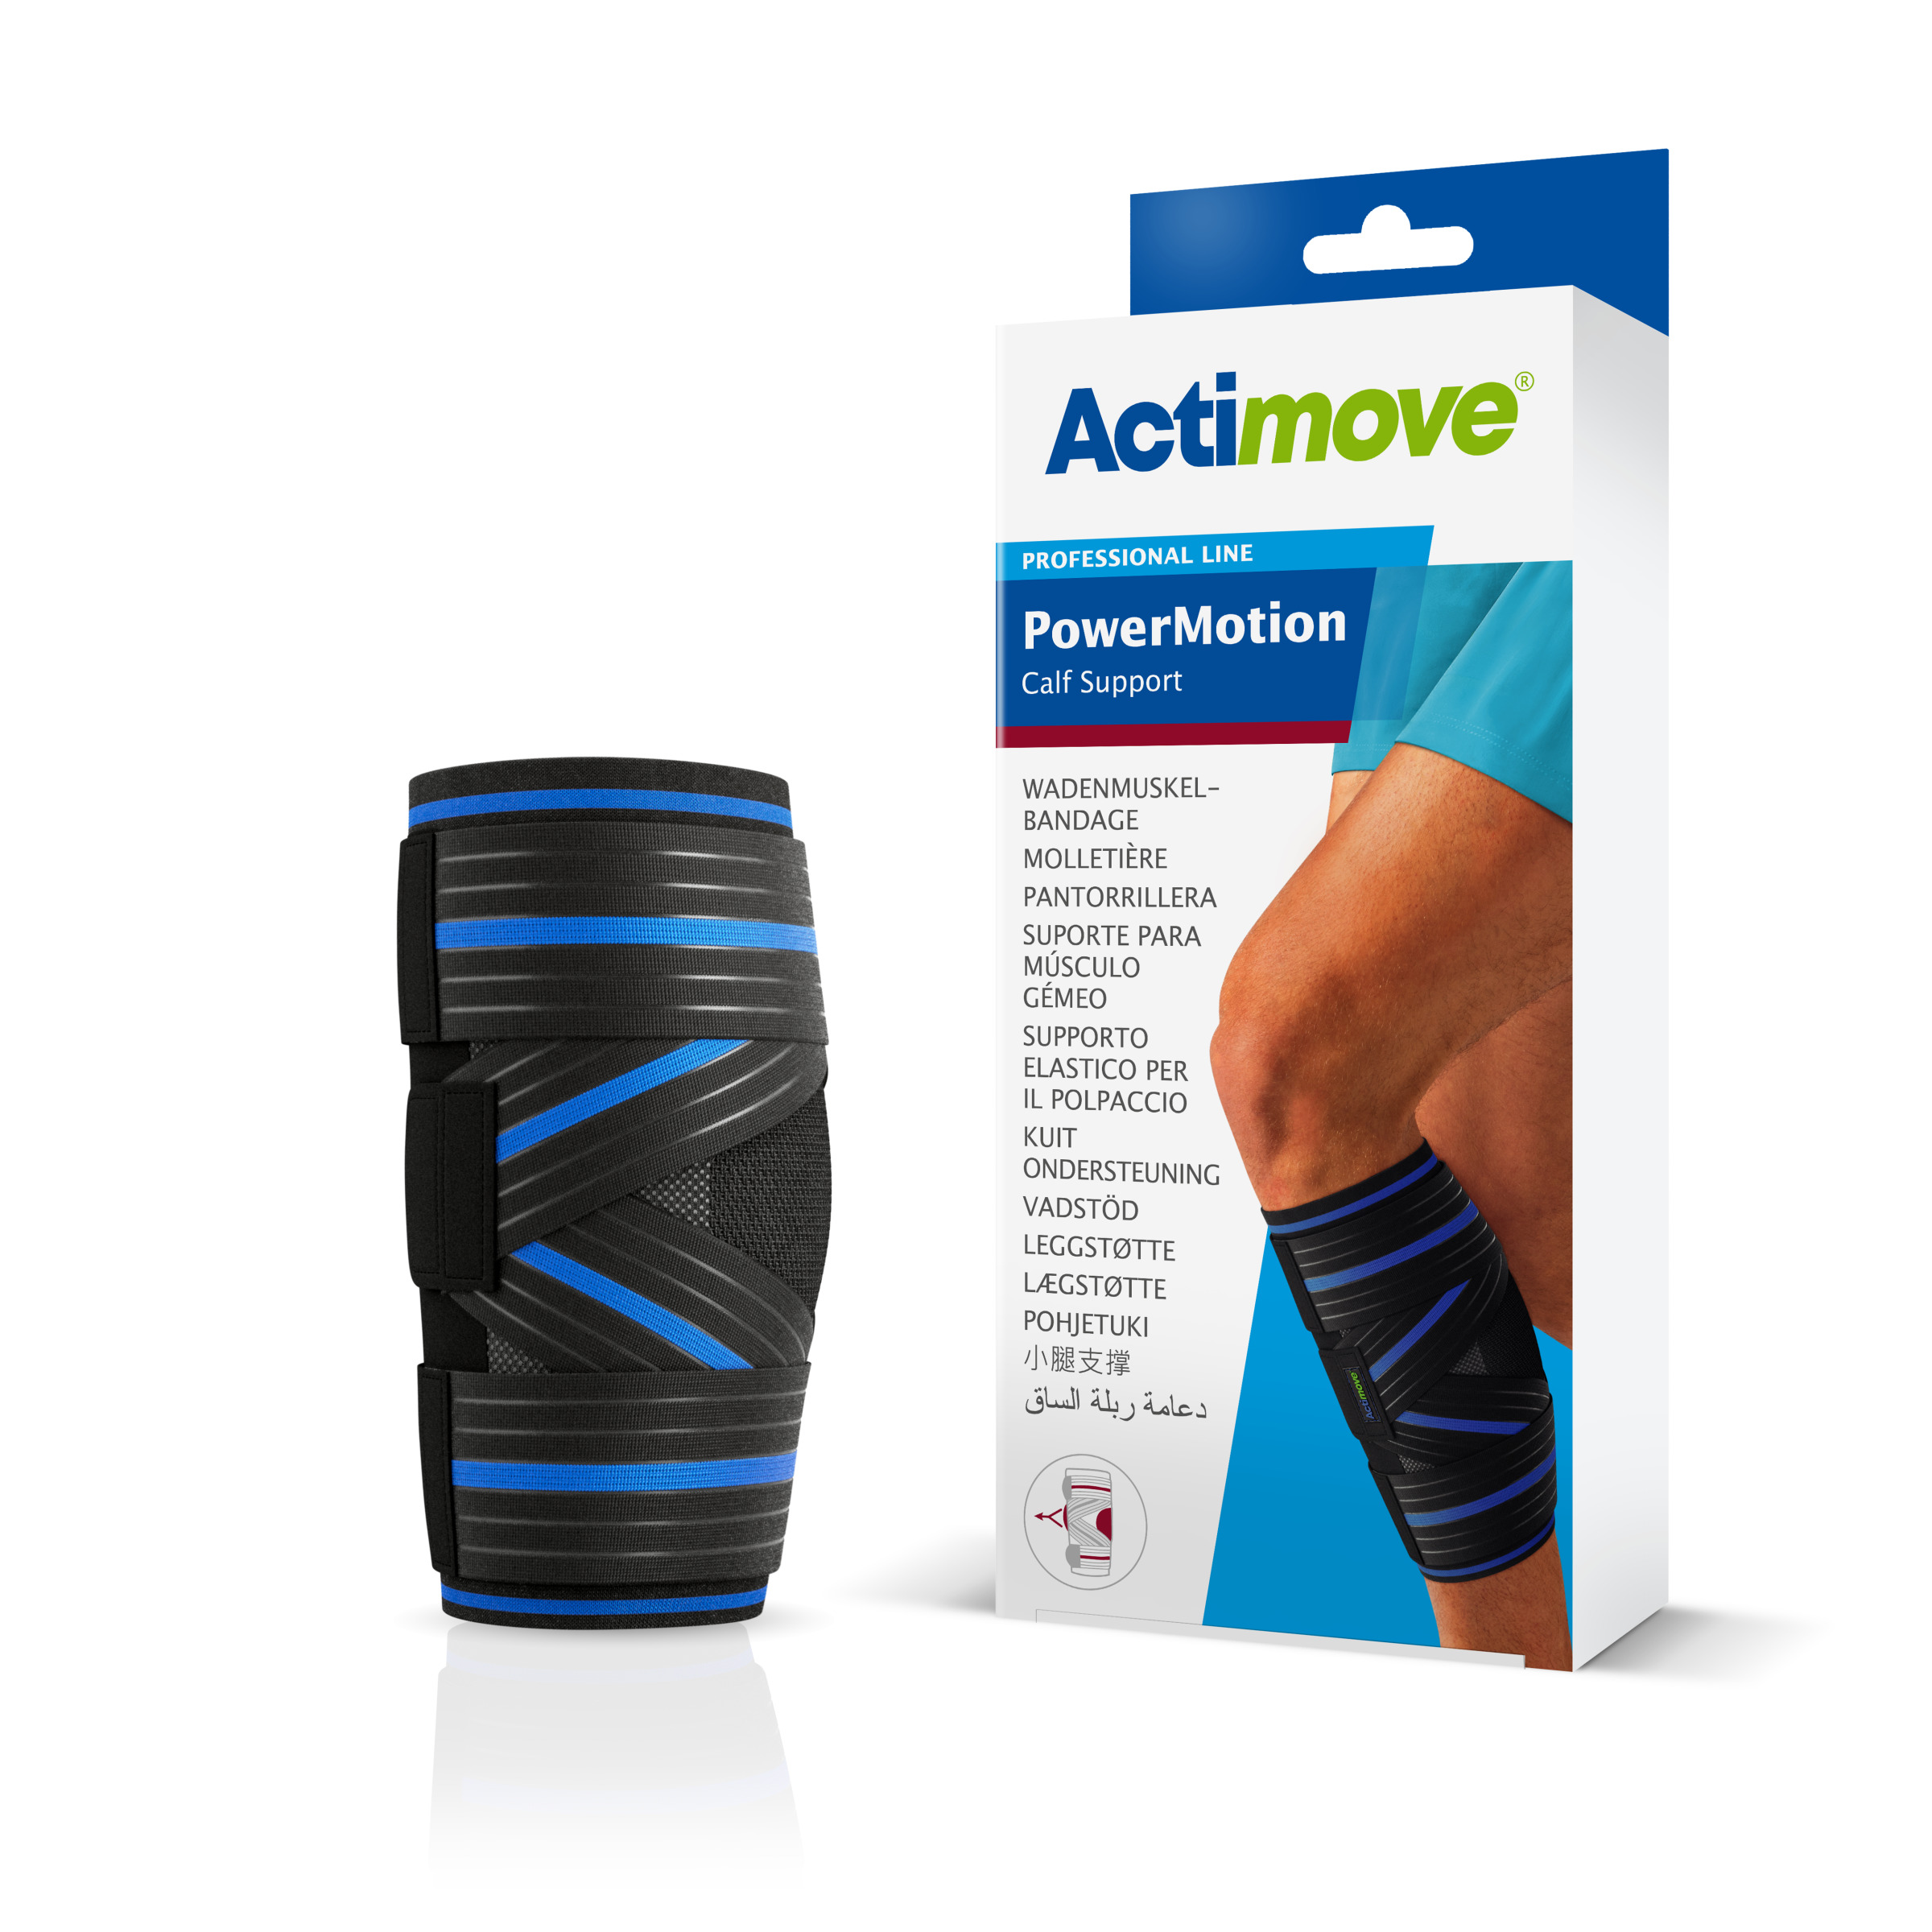 https://medical.essityusa.com/fileadmin/z-brands/Actimove/Medical.Essity_US/Product_Images/Actimove_PowerMotion_Calf_Muscle_Support.jpg